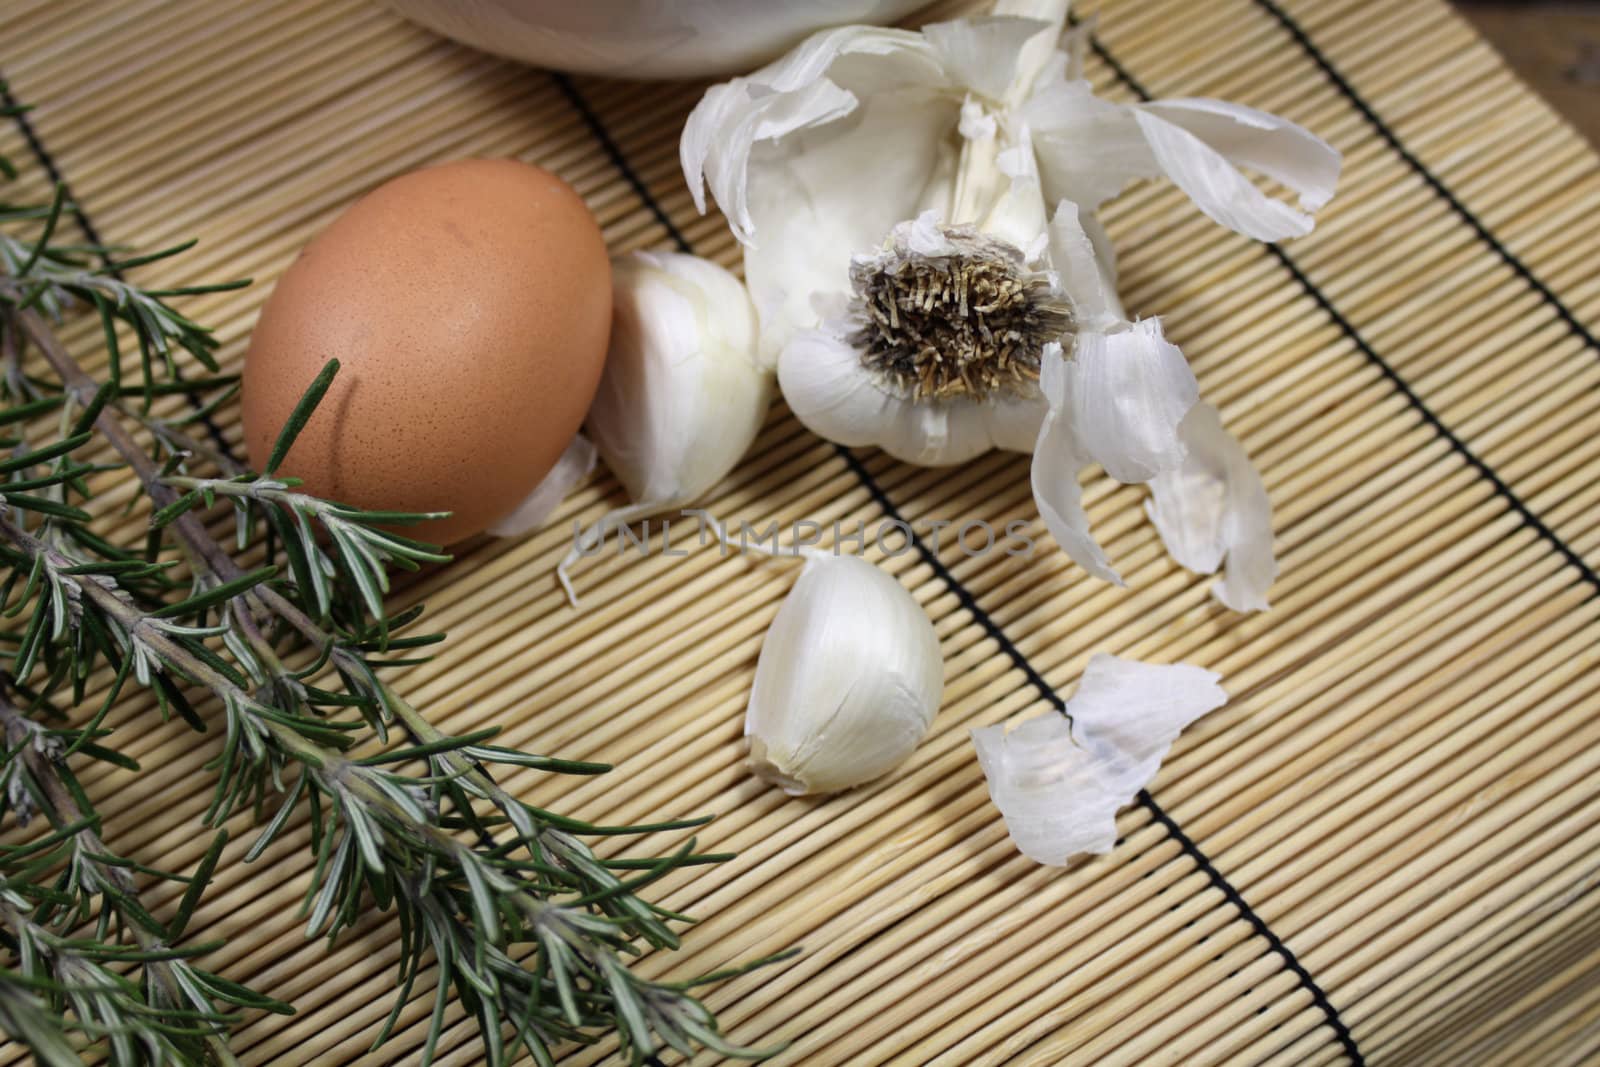 Close up detail of food ingredients comprising of a single brown egg, a bulb of garlic and a sprig of rosemary. All set on a landscape format on a bamboo matting base.